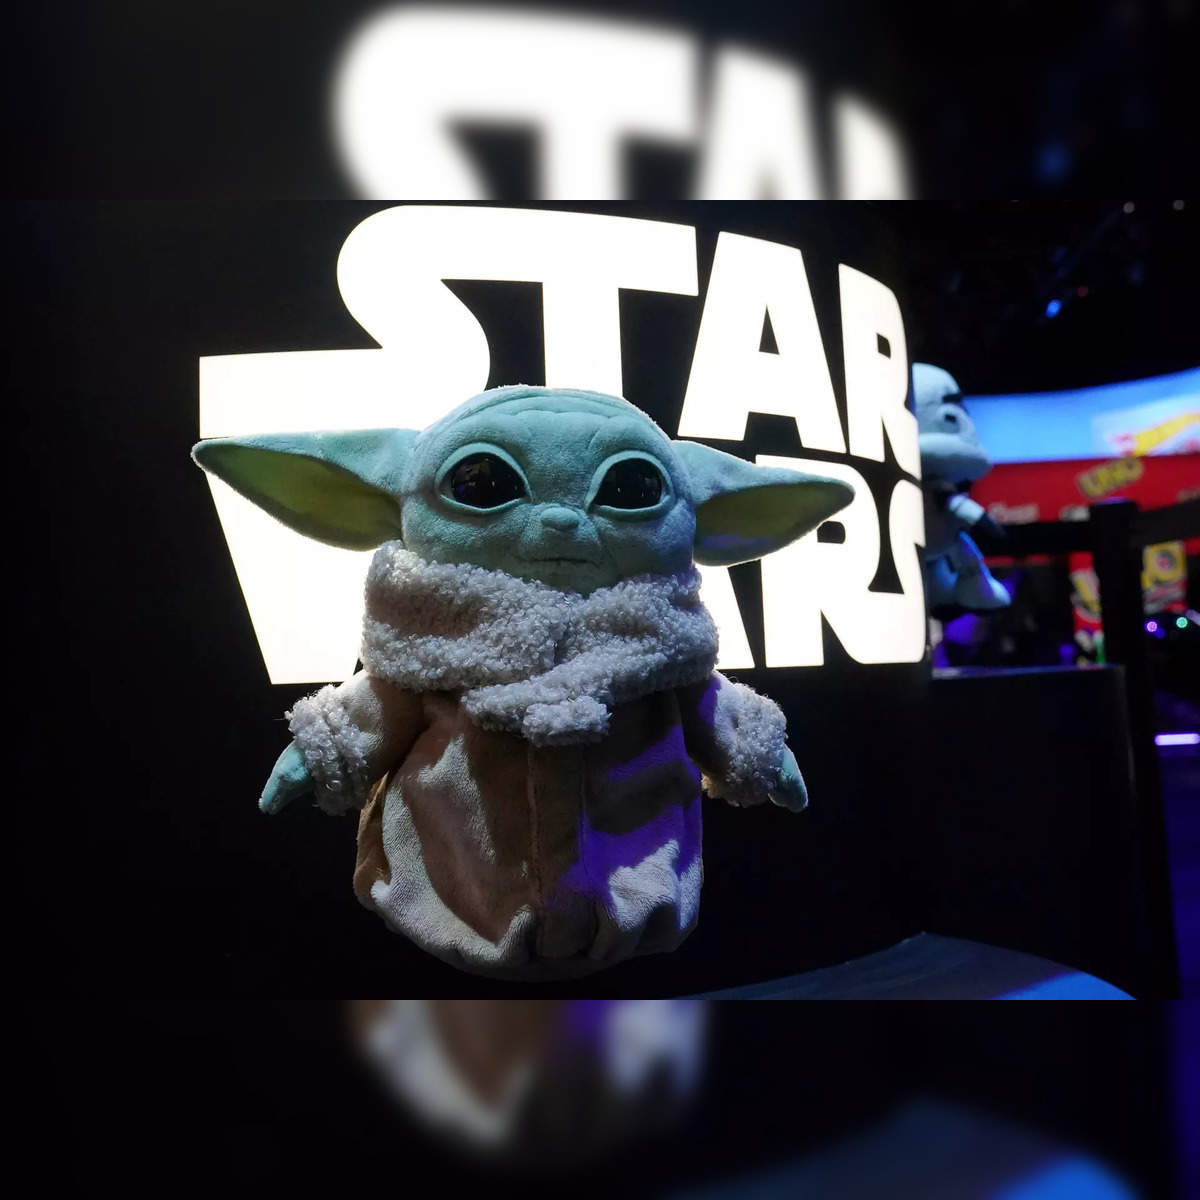 lego star wars: Baby Yoda is back! 'Star Wars' announces return with new  movie 'The Mandalorian & Grogu' - The Economic Times